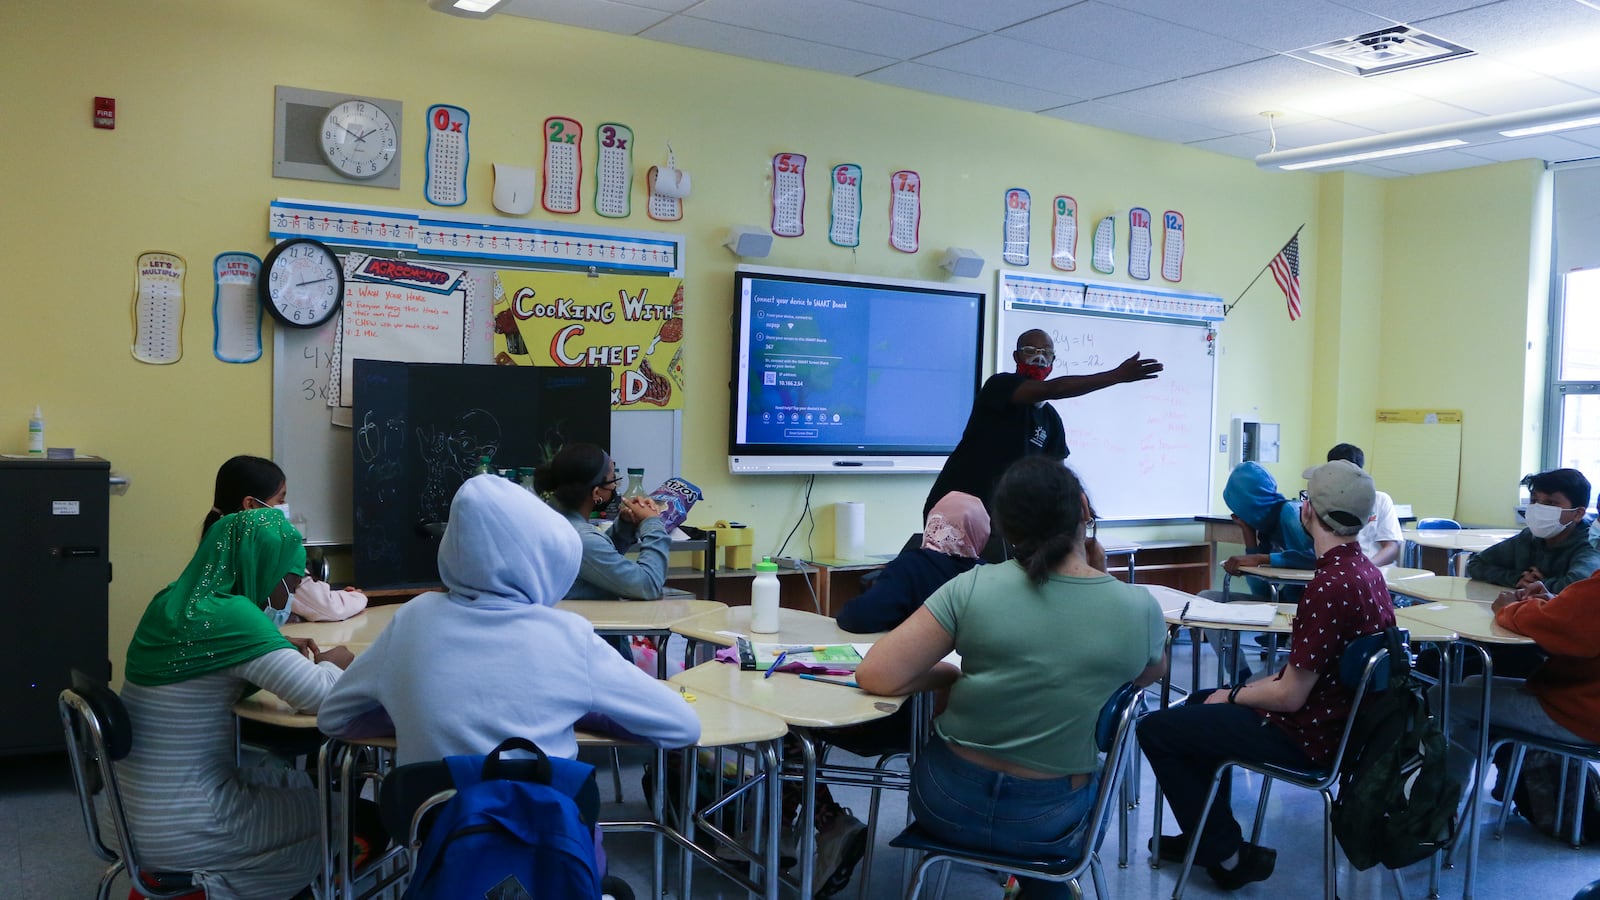 Students sit in a classroom wearing masks while a teacher leads a lesson in front of a screen.